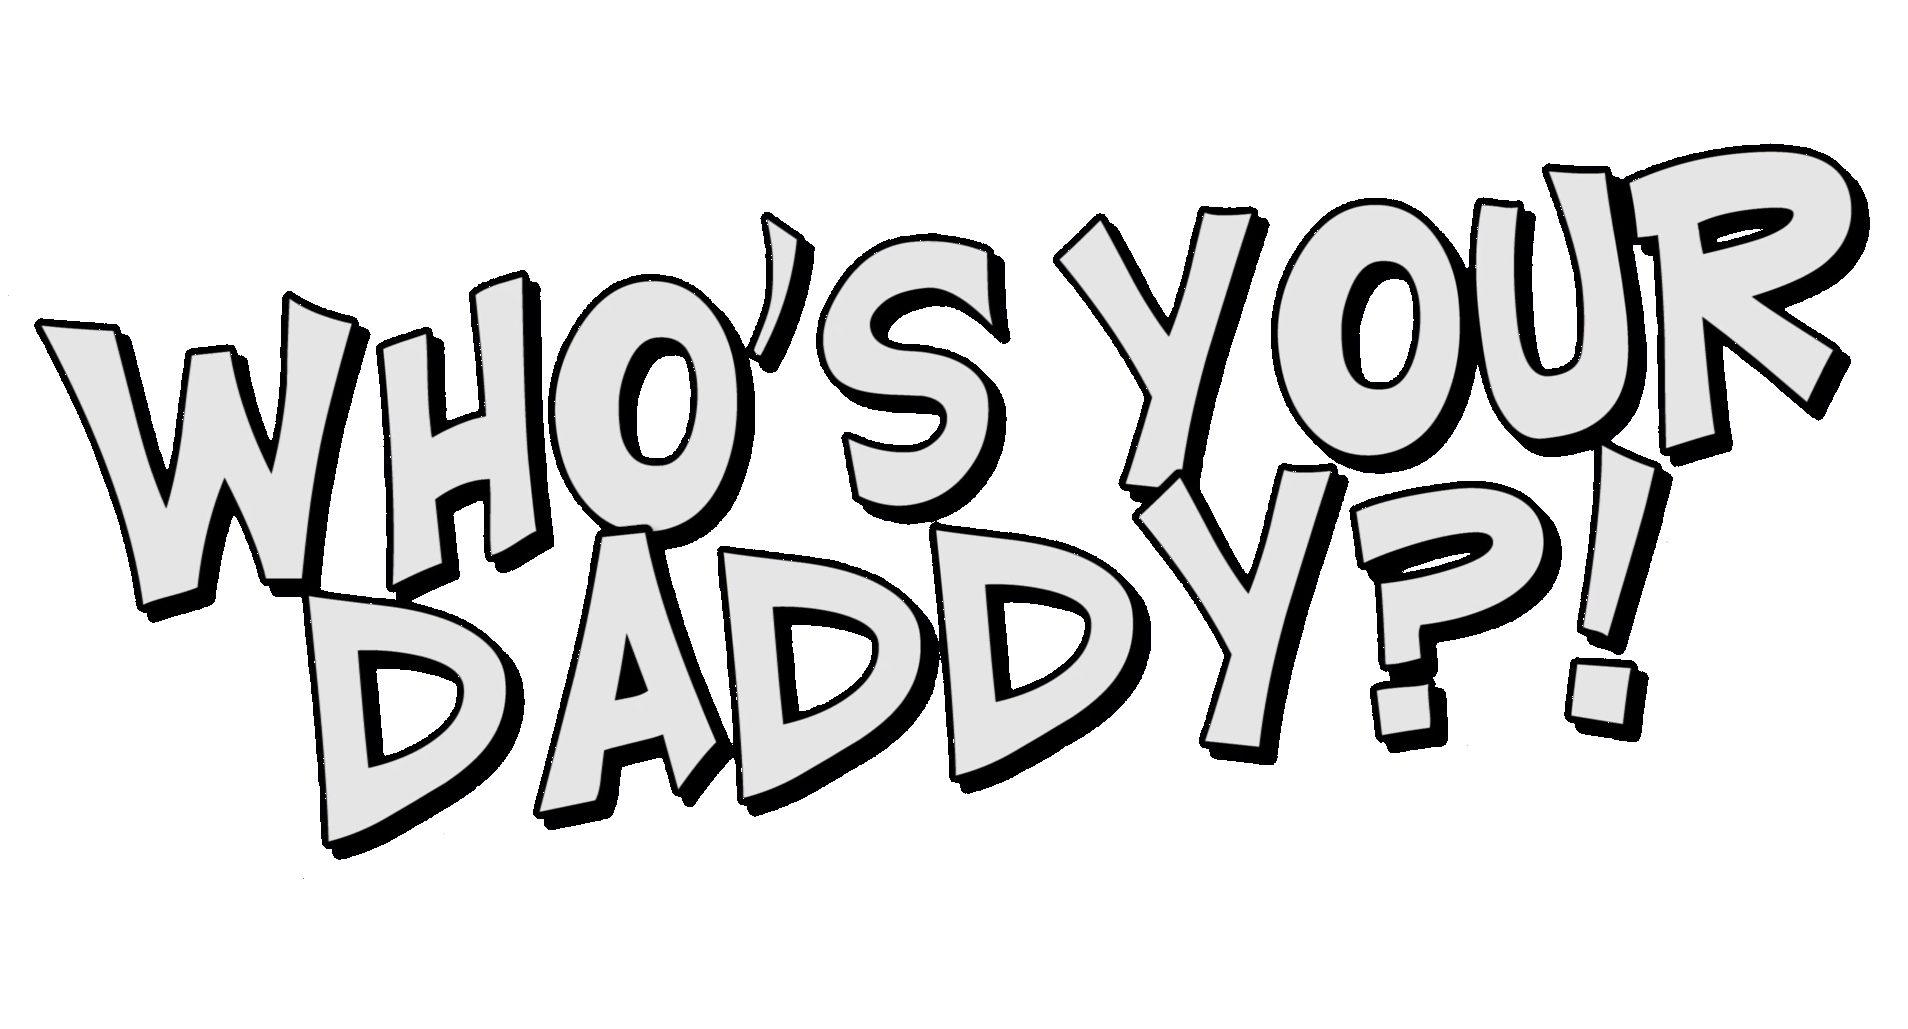 Logo Daddy 01. Made by dad logo. Danny and Daddy logo PNG. Mummy and Daddy logo PNG.